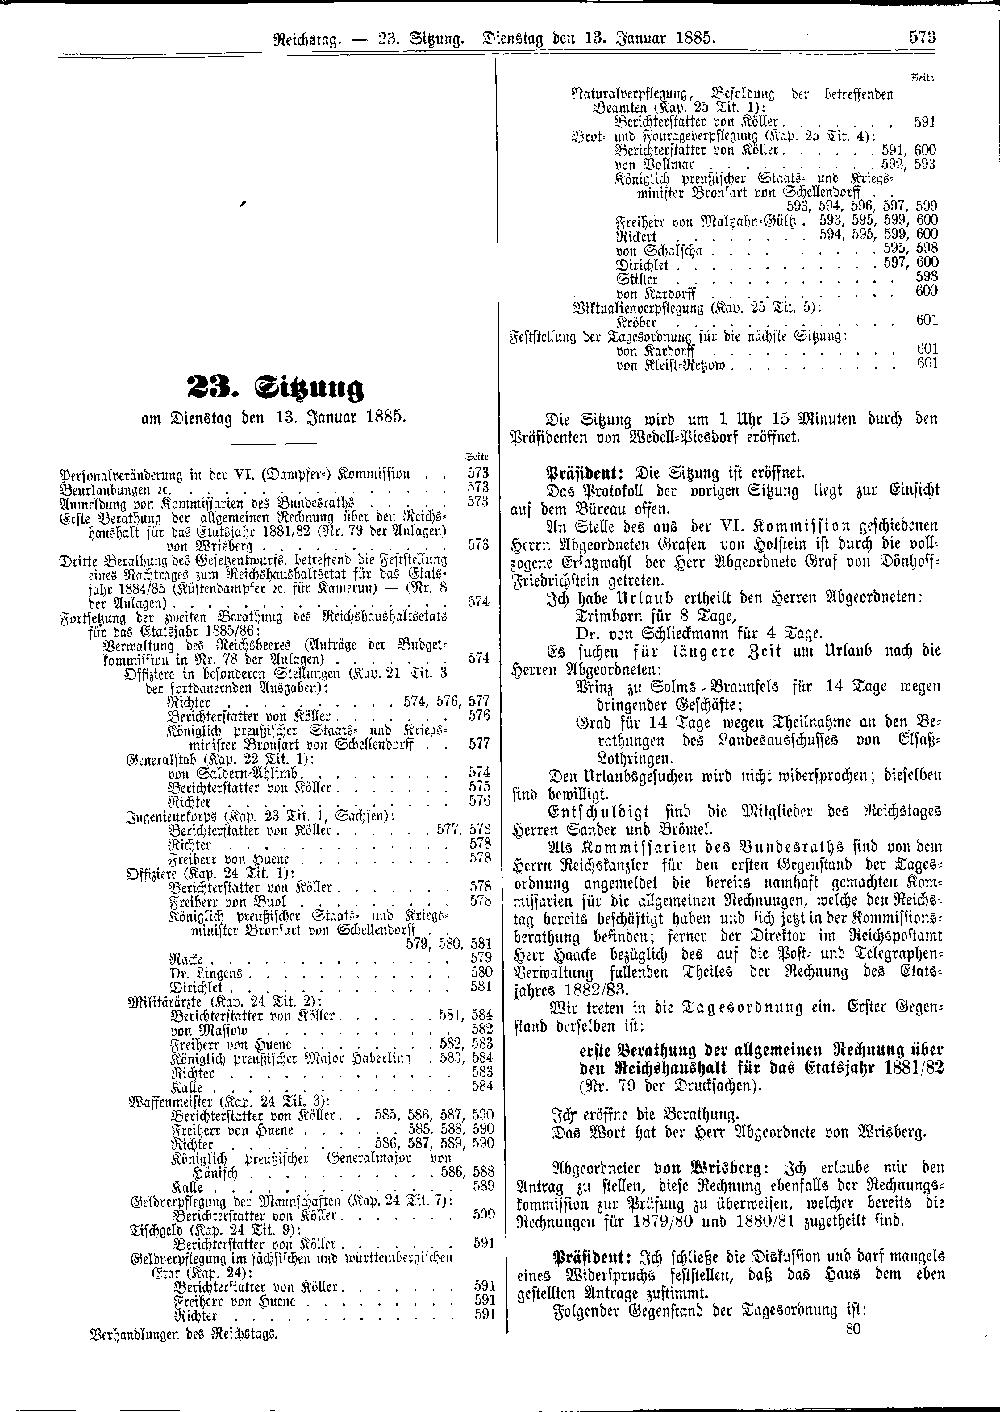 Scan of page 573